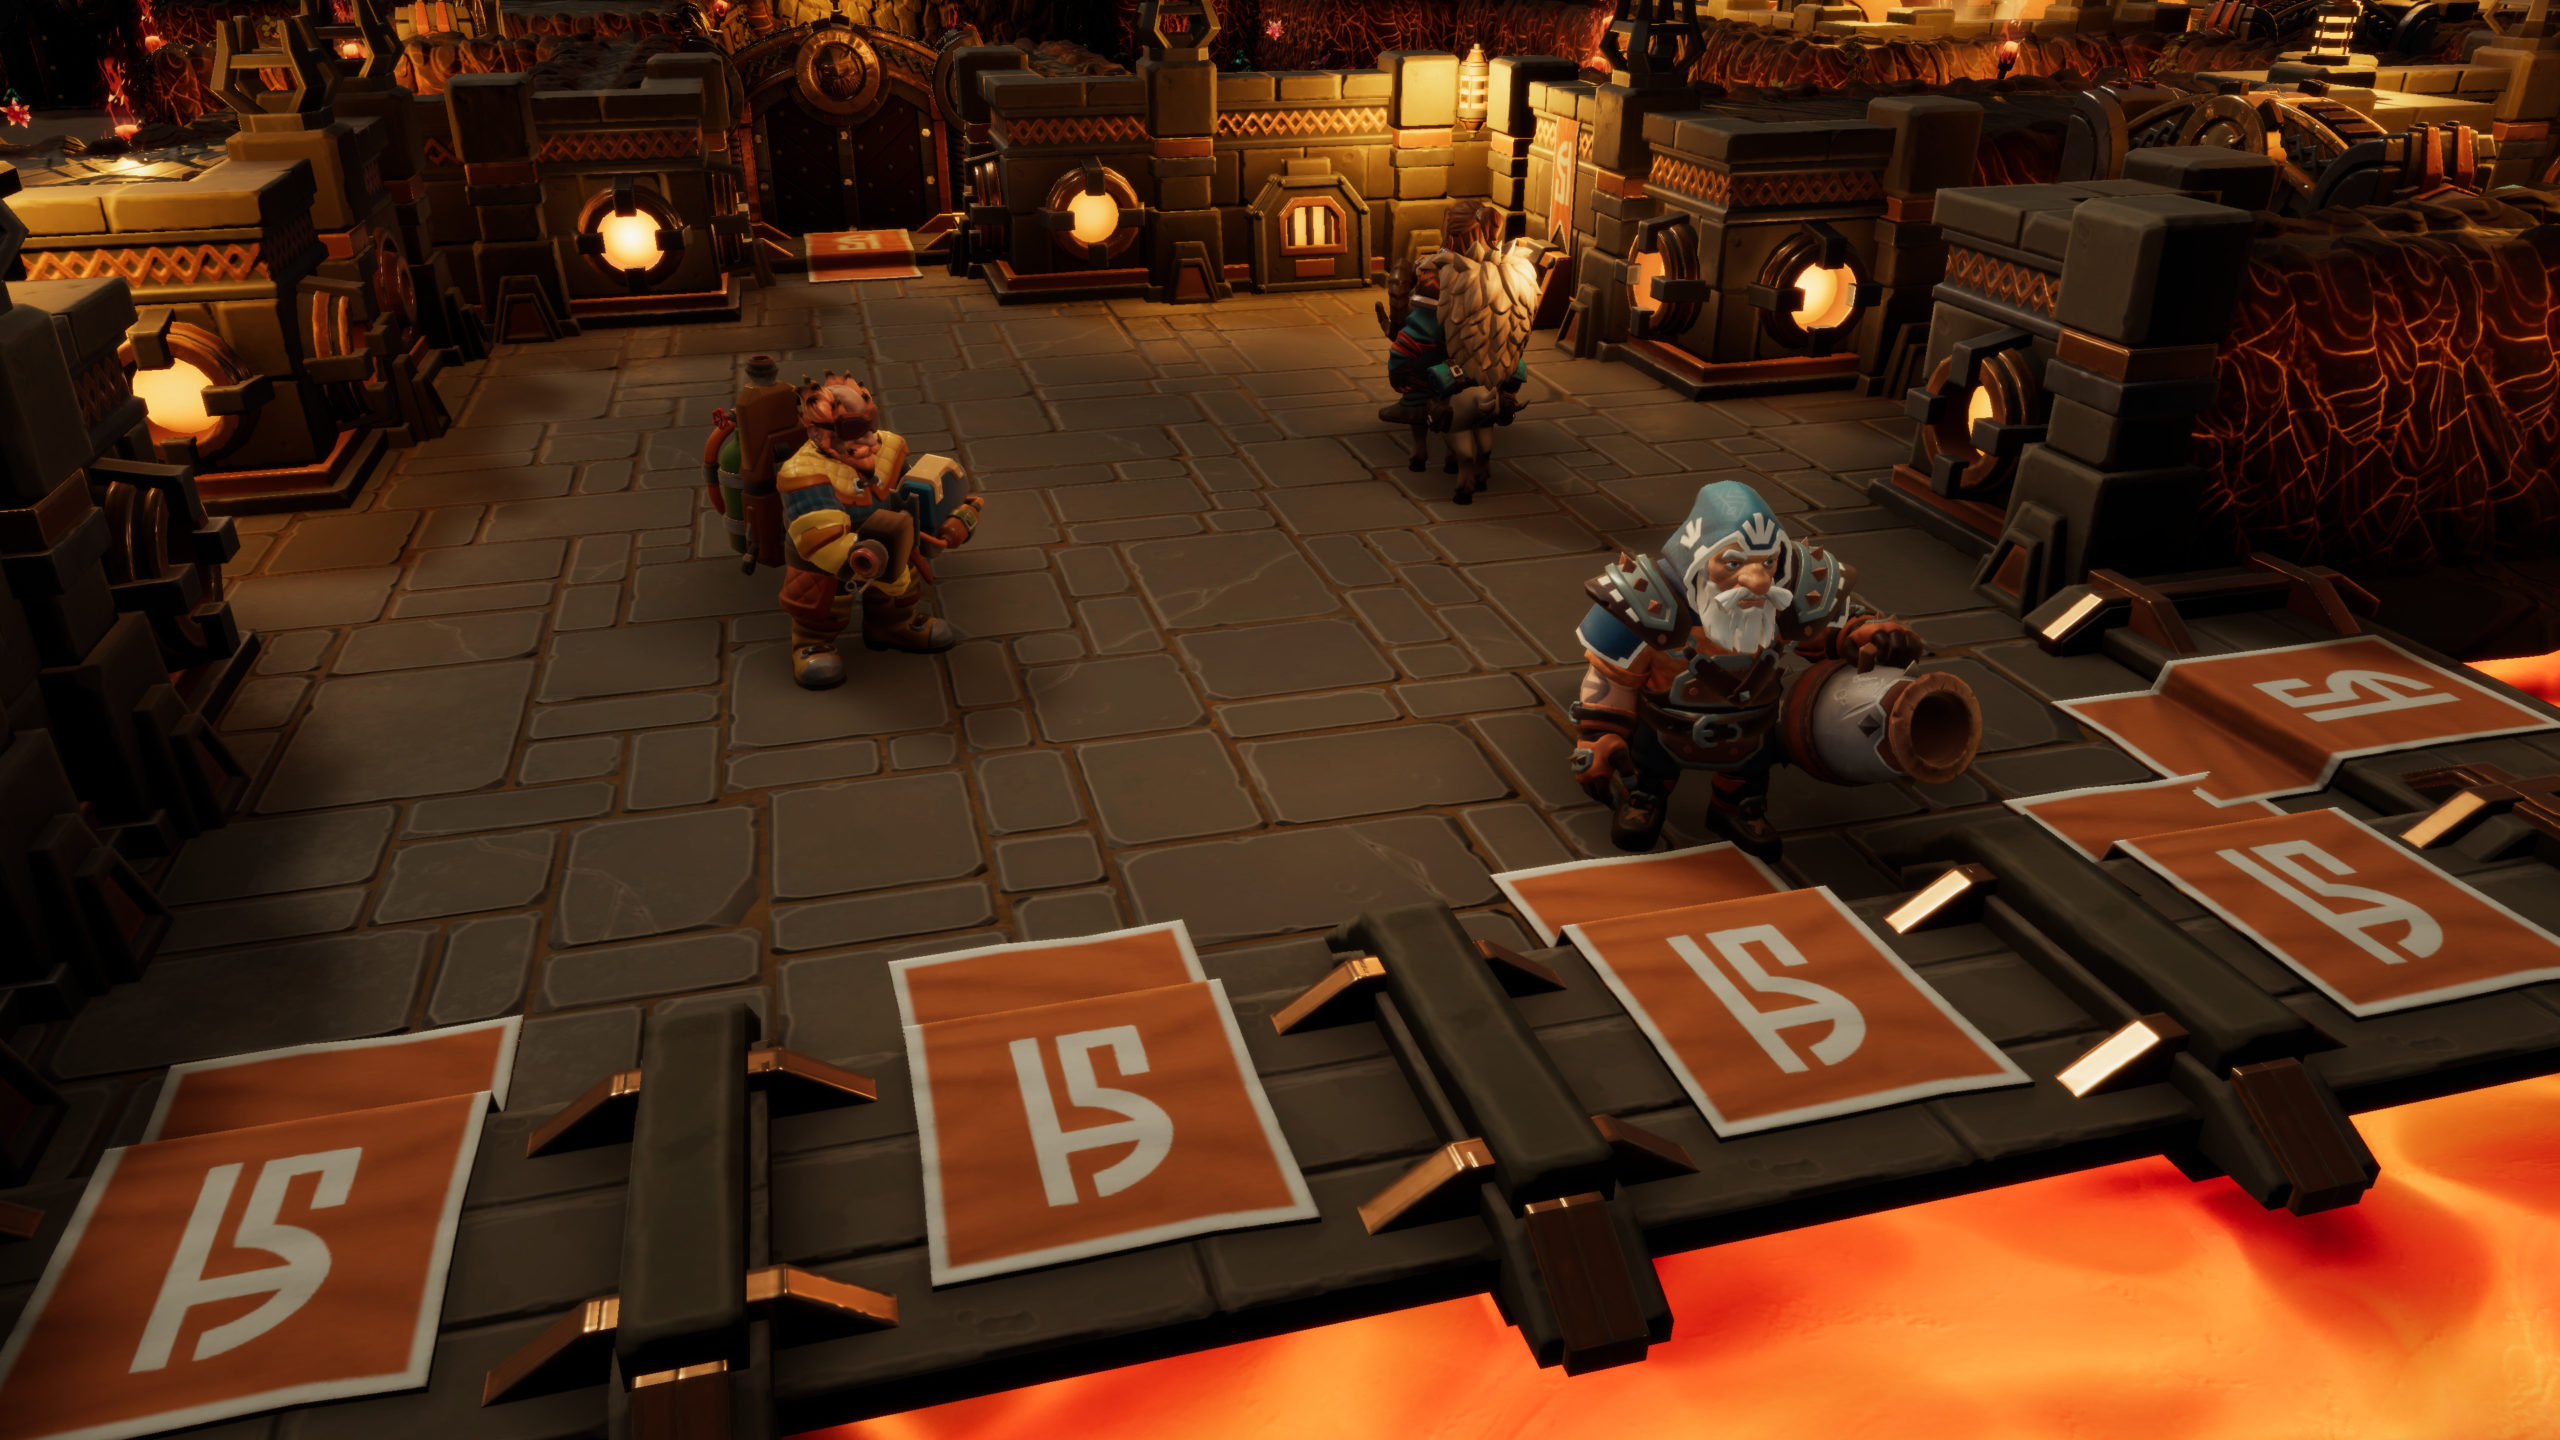 Dungeons 4 Explores The Series' Growth Ahead of Launch - Finger Guns